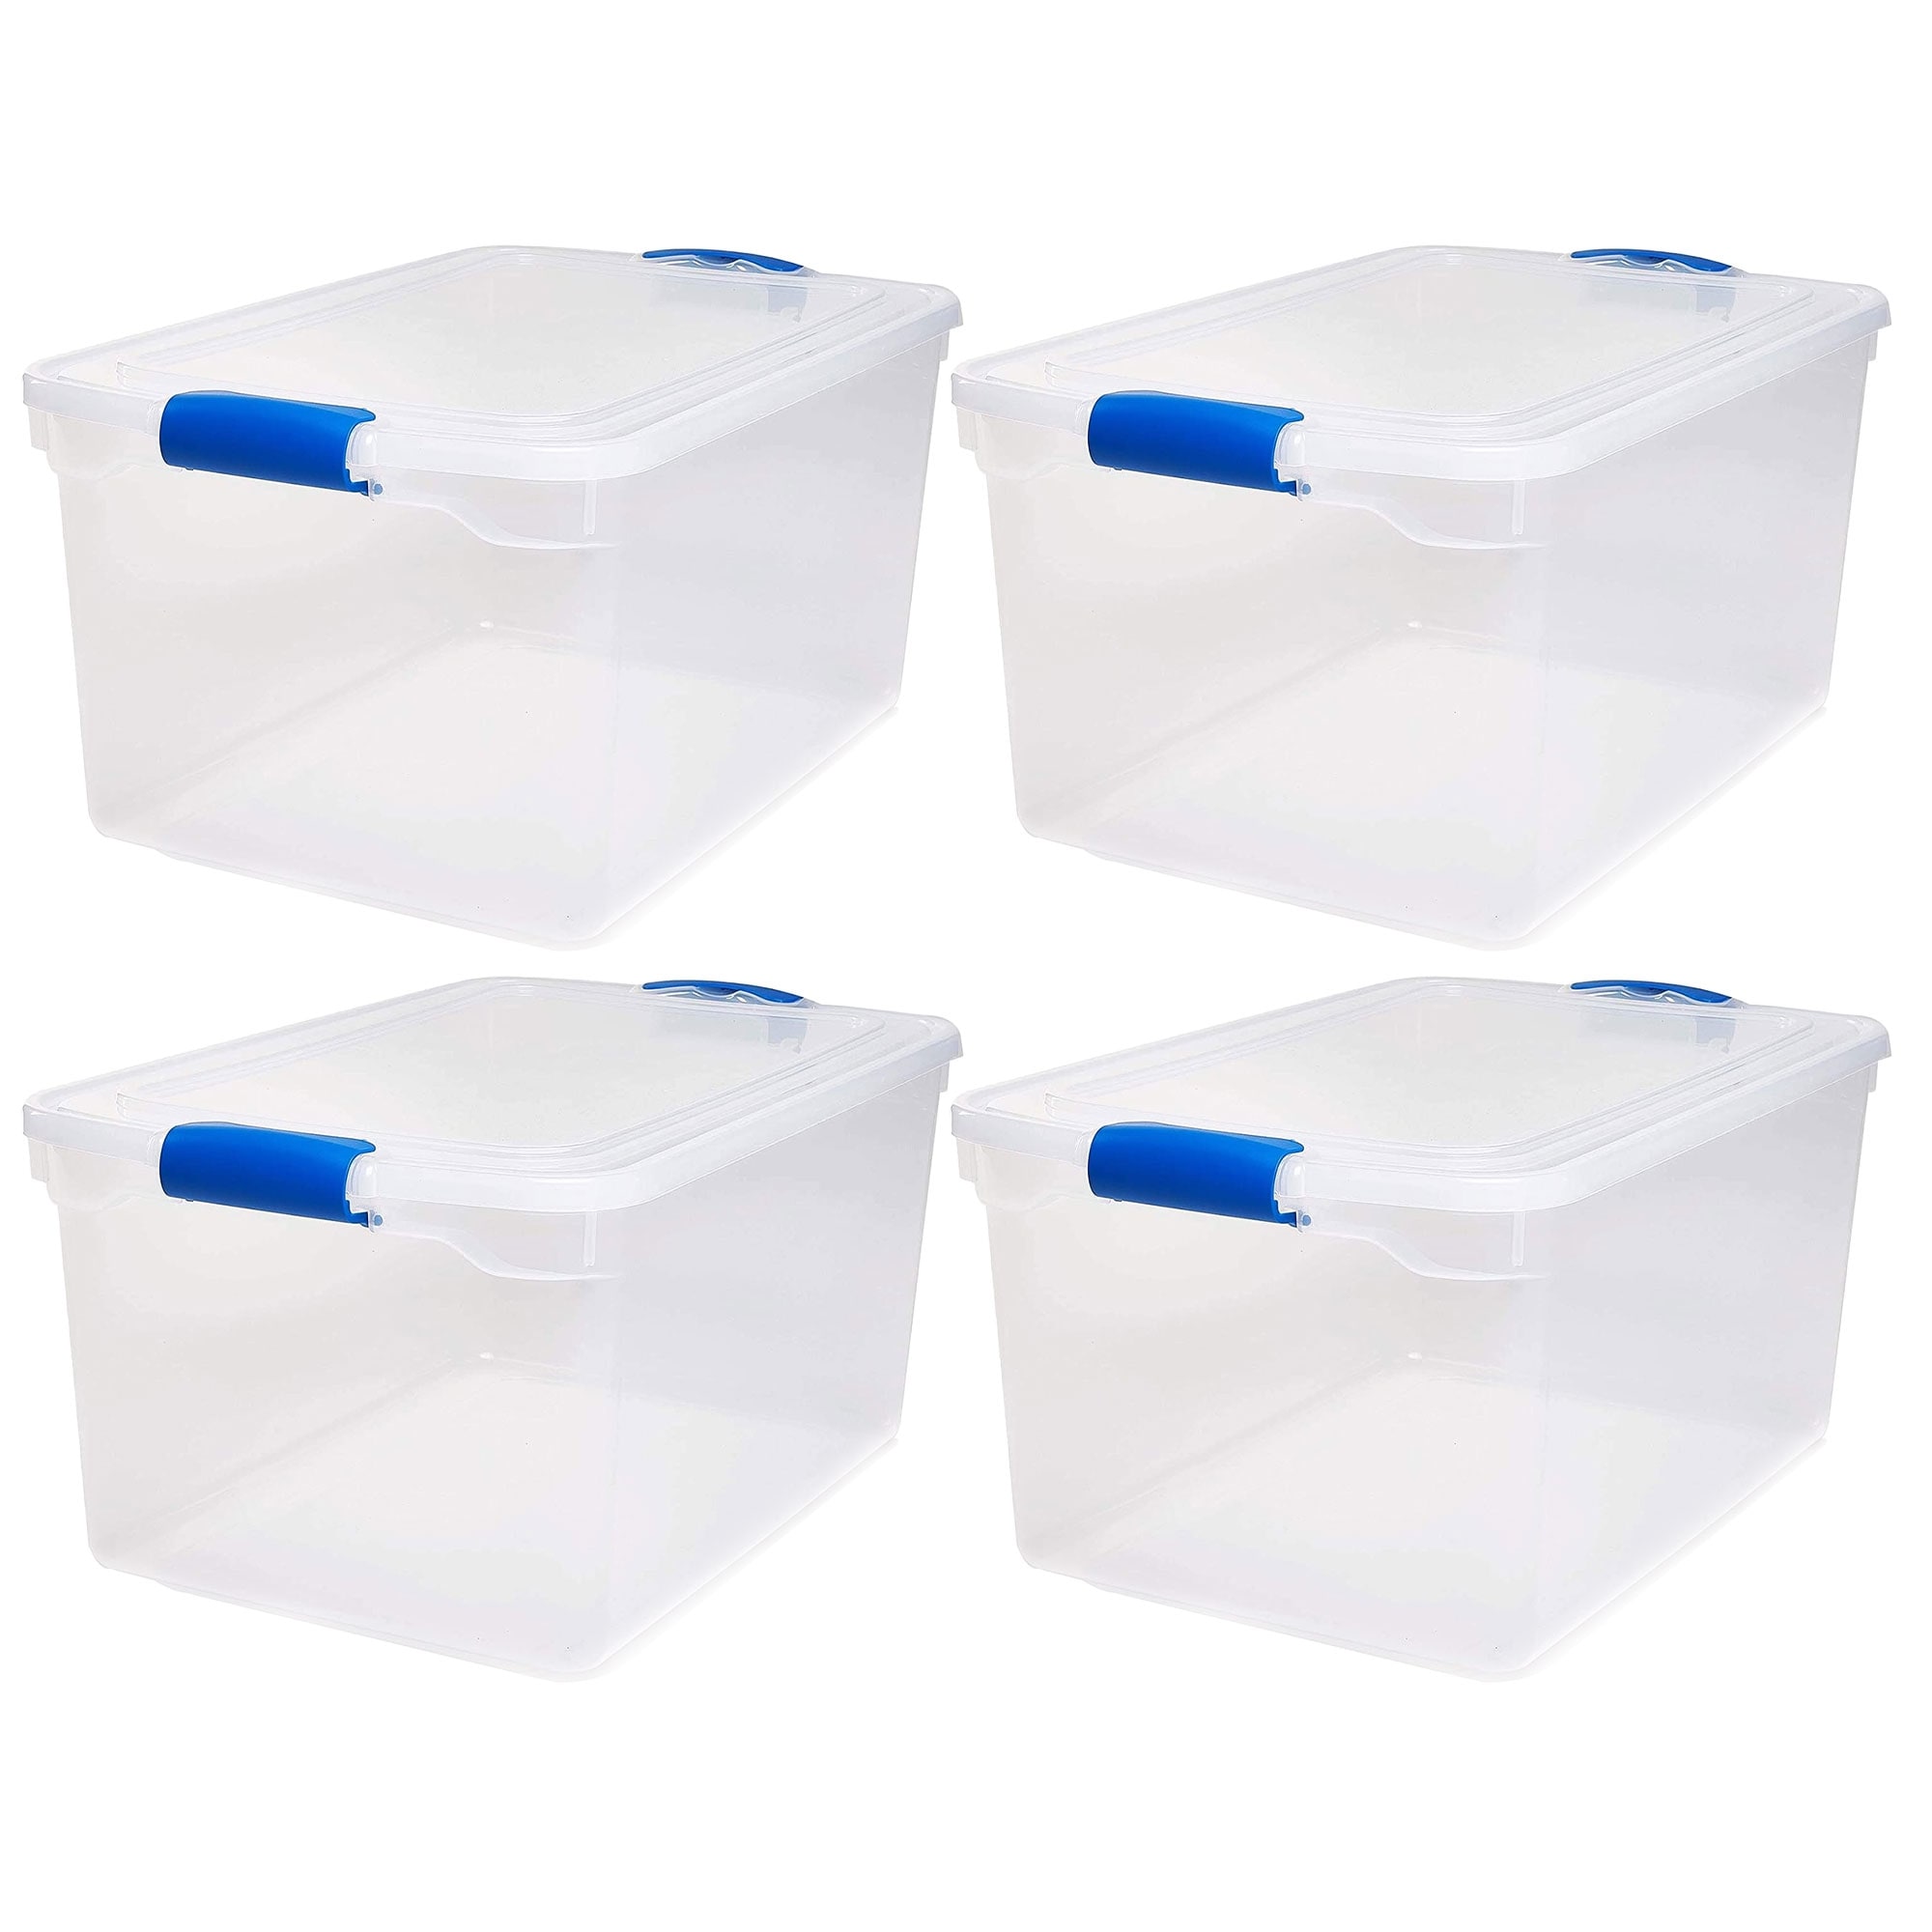 https://ak1.ostkcdn.com/images/products/is/images/direct/2e6d648485cc30801db806dd2cd427e2b0bcc502/Homz-66-Quart-Heavy-Duty-Modular-Stackable-Storage-Containers%2C-Clear%2C-4-Pack.jpg